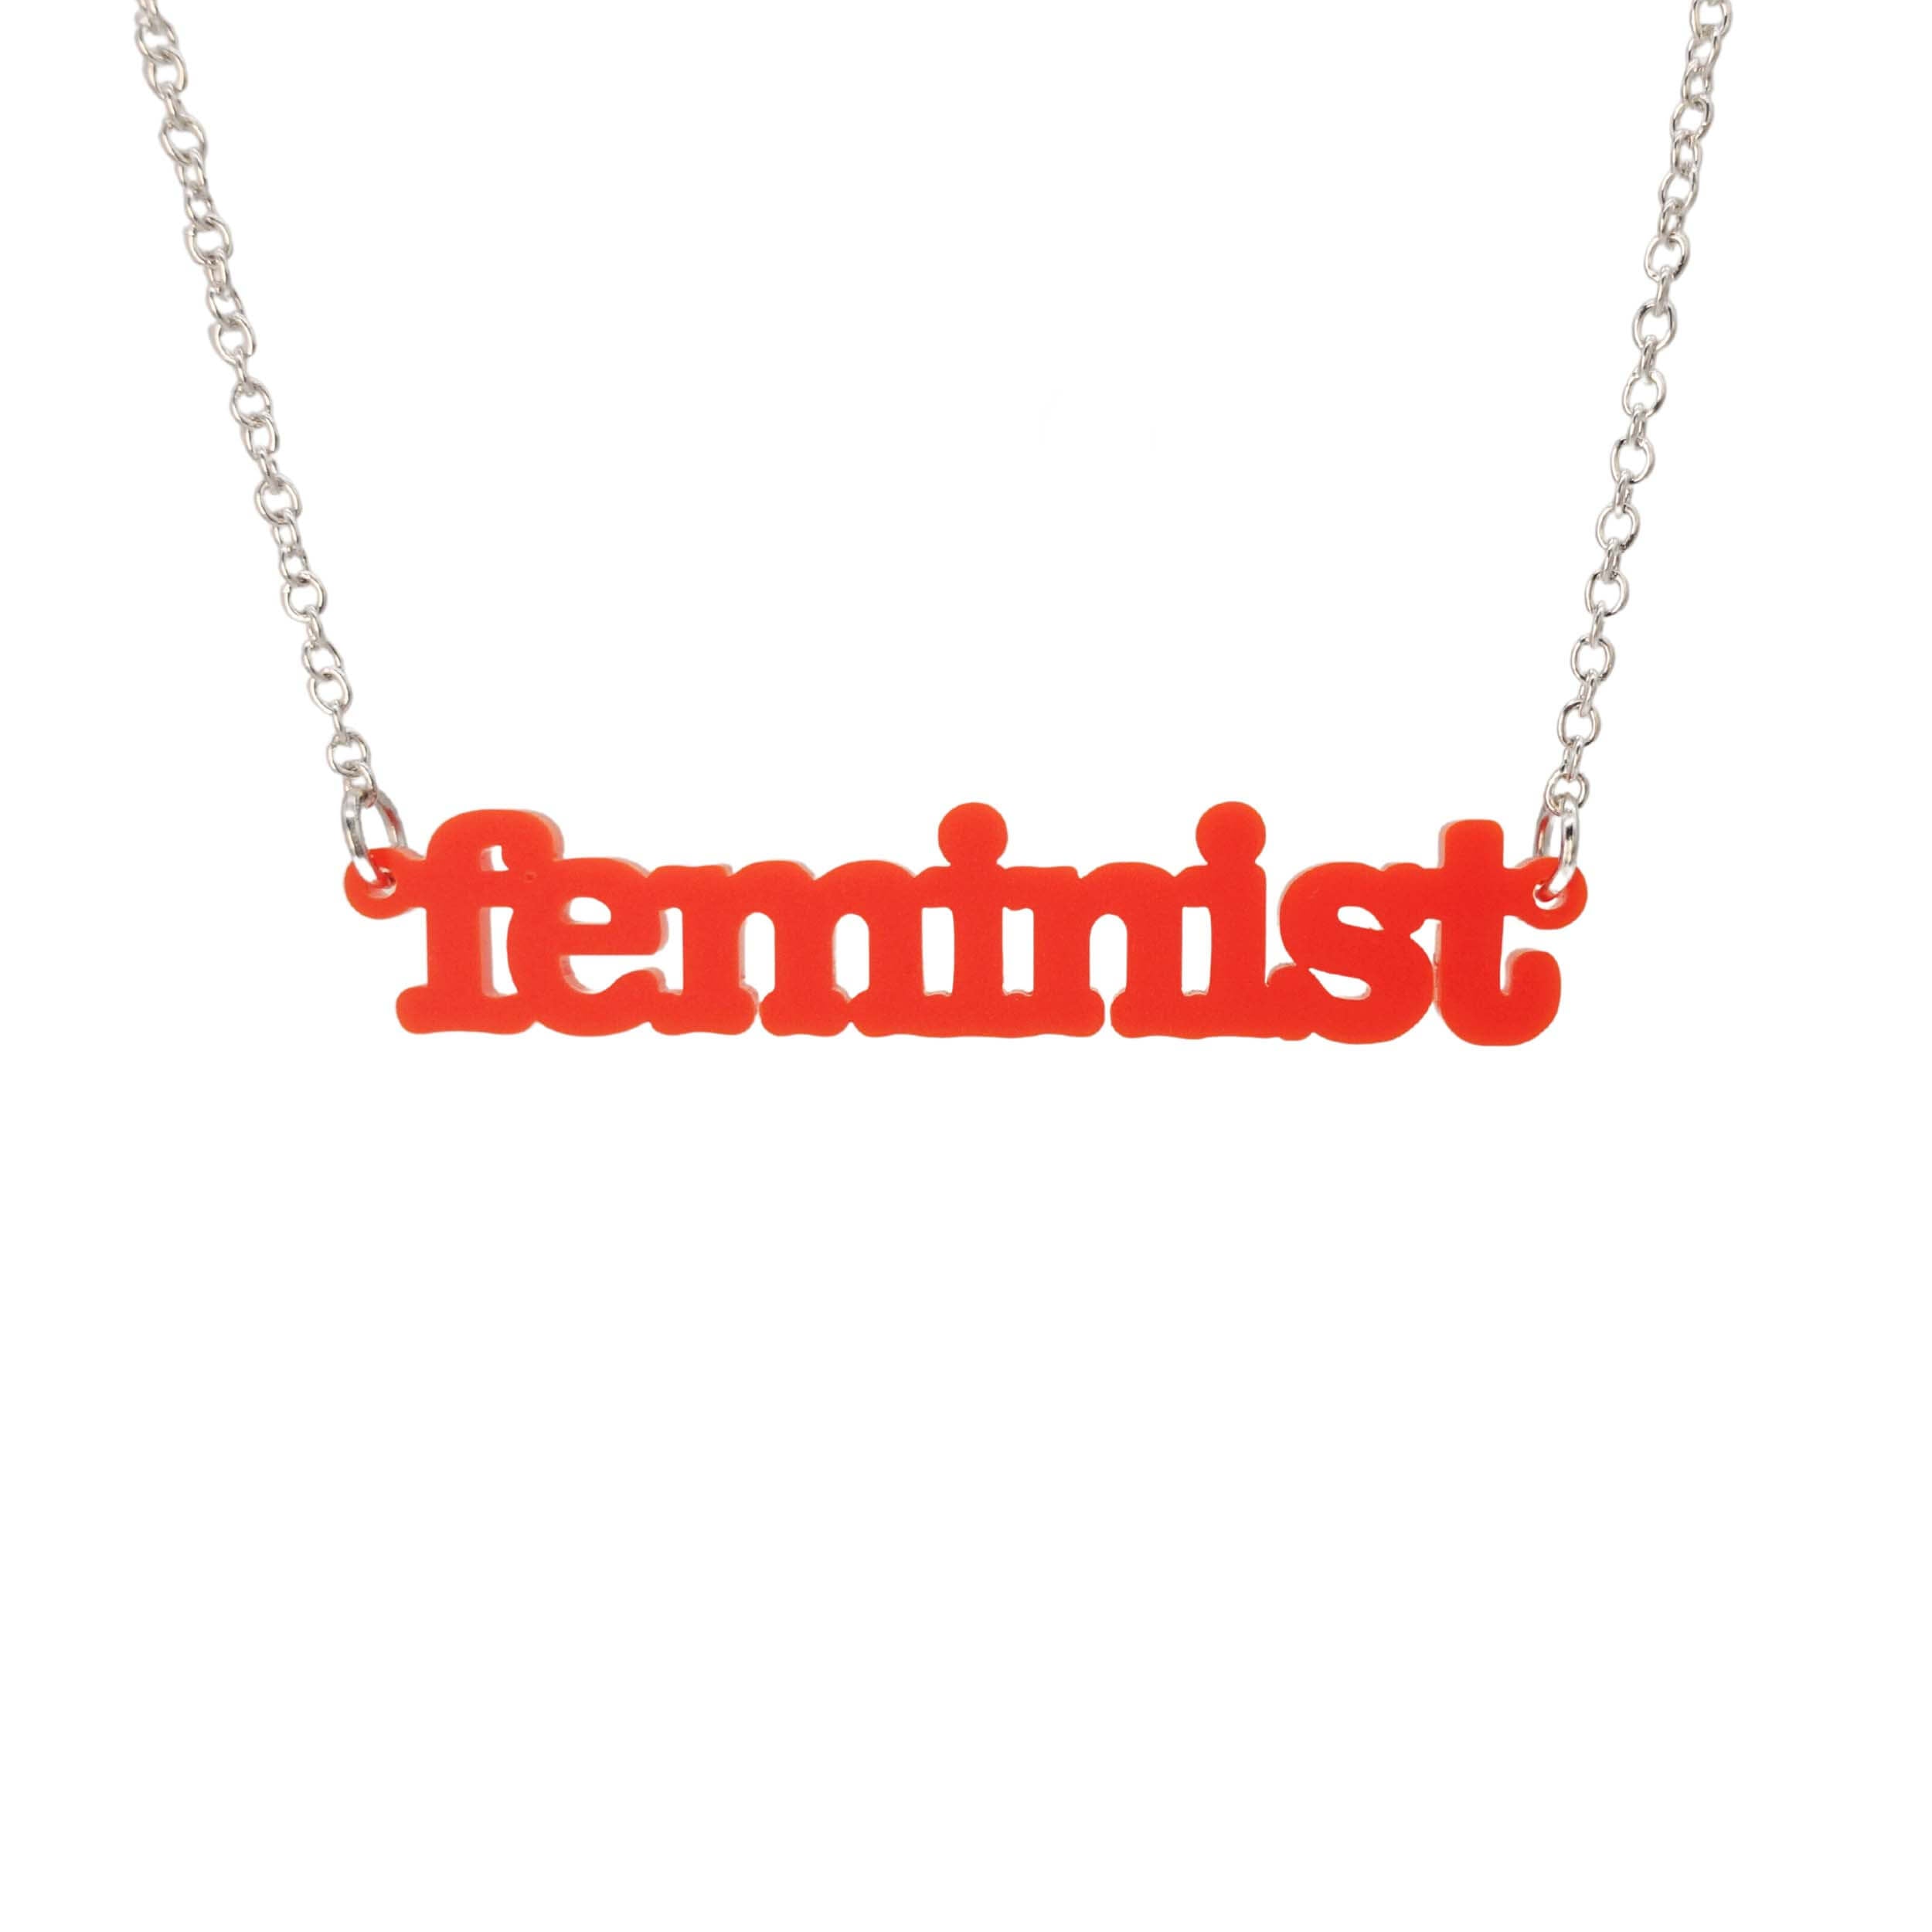 Matte red Feminist necklace shown hanging on a white background. 